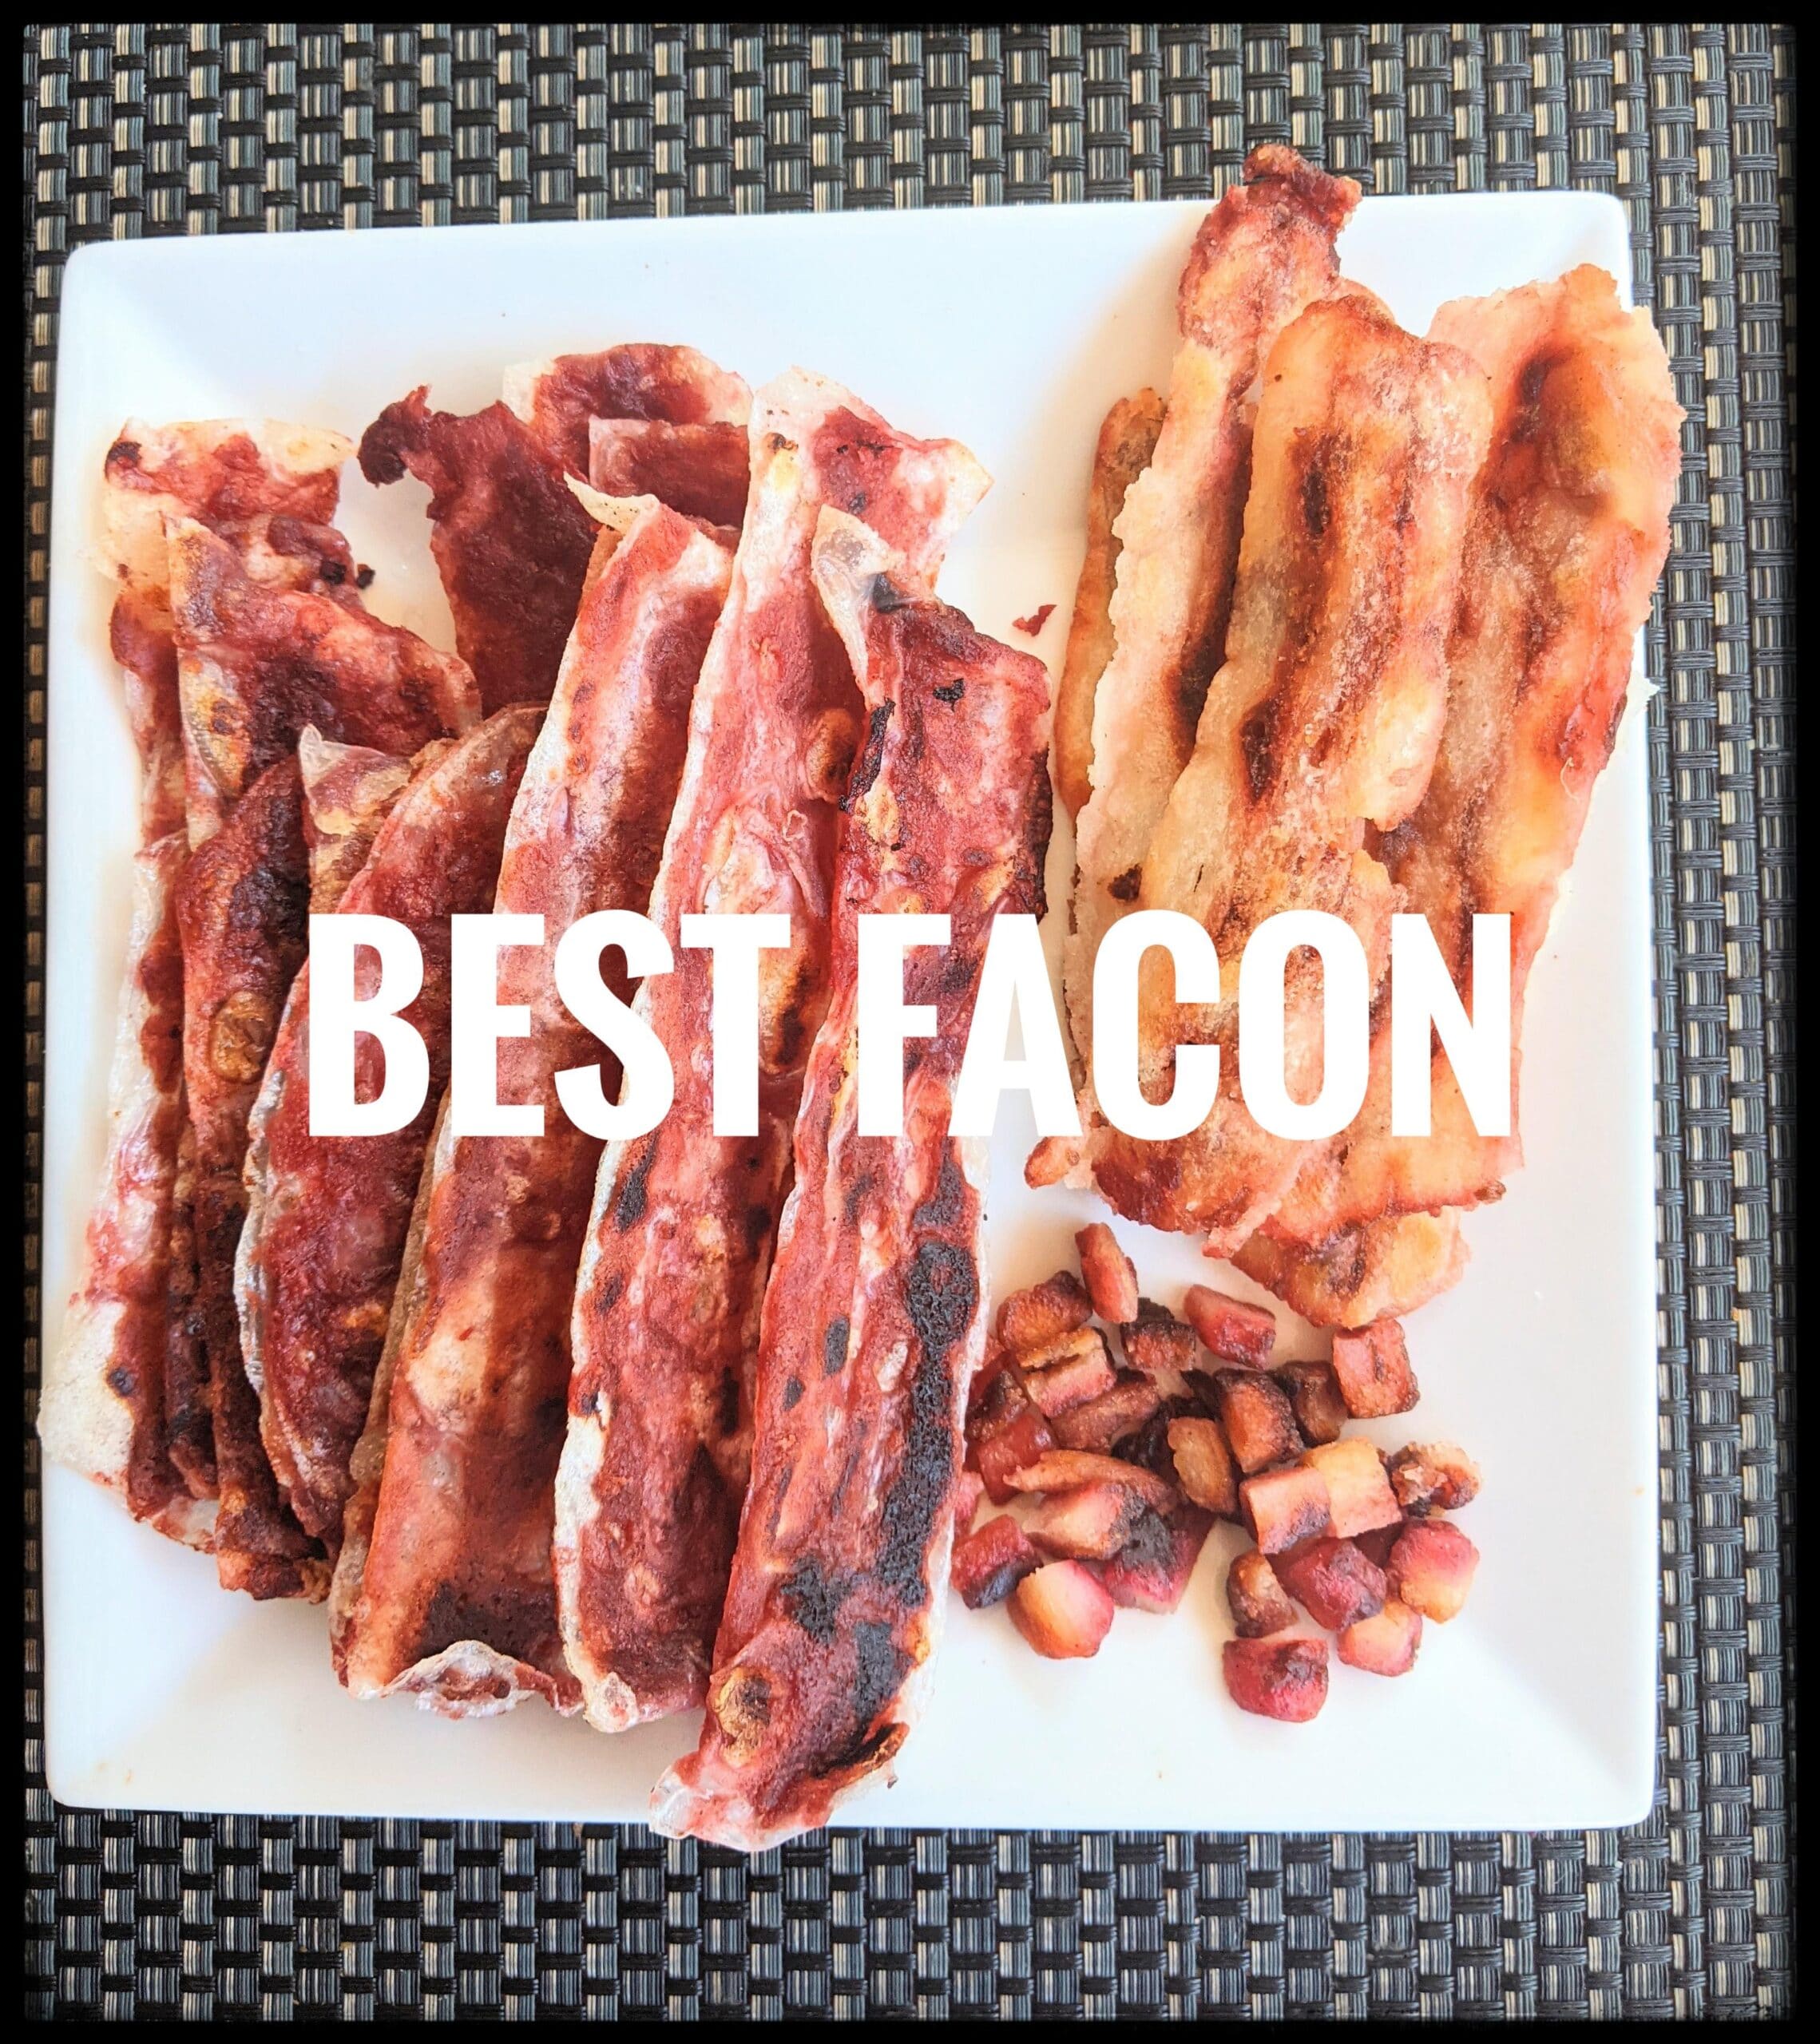 The BEST Bacon You Will Ever Make - Sweetpea Lifestyle